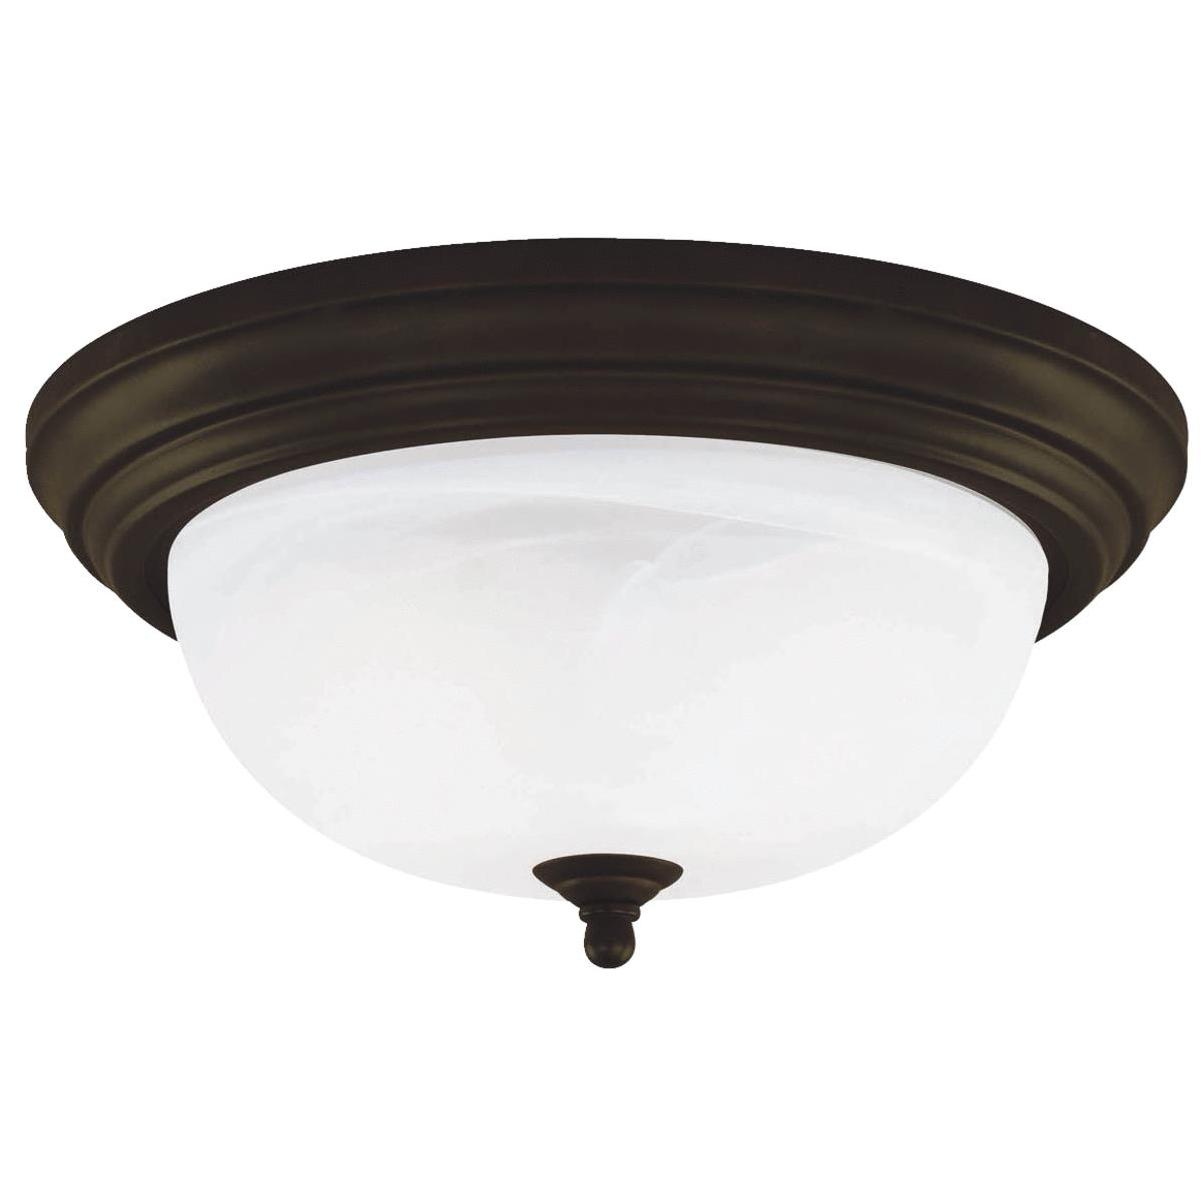 White Incandescent Flush Mount Ceiling Light Fixture Home Impressions 6 In 